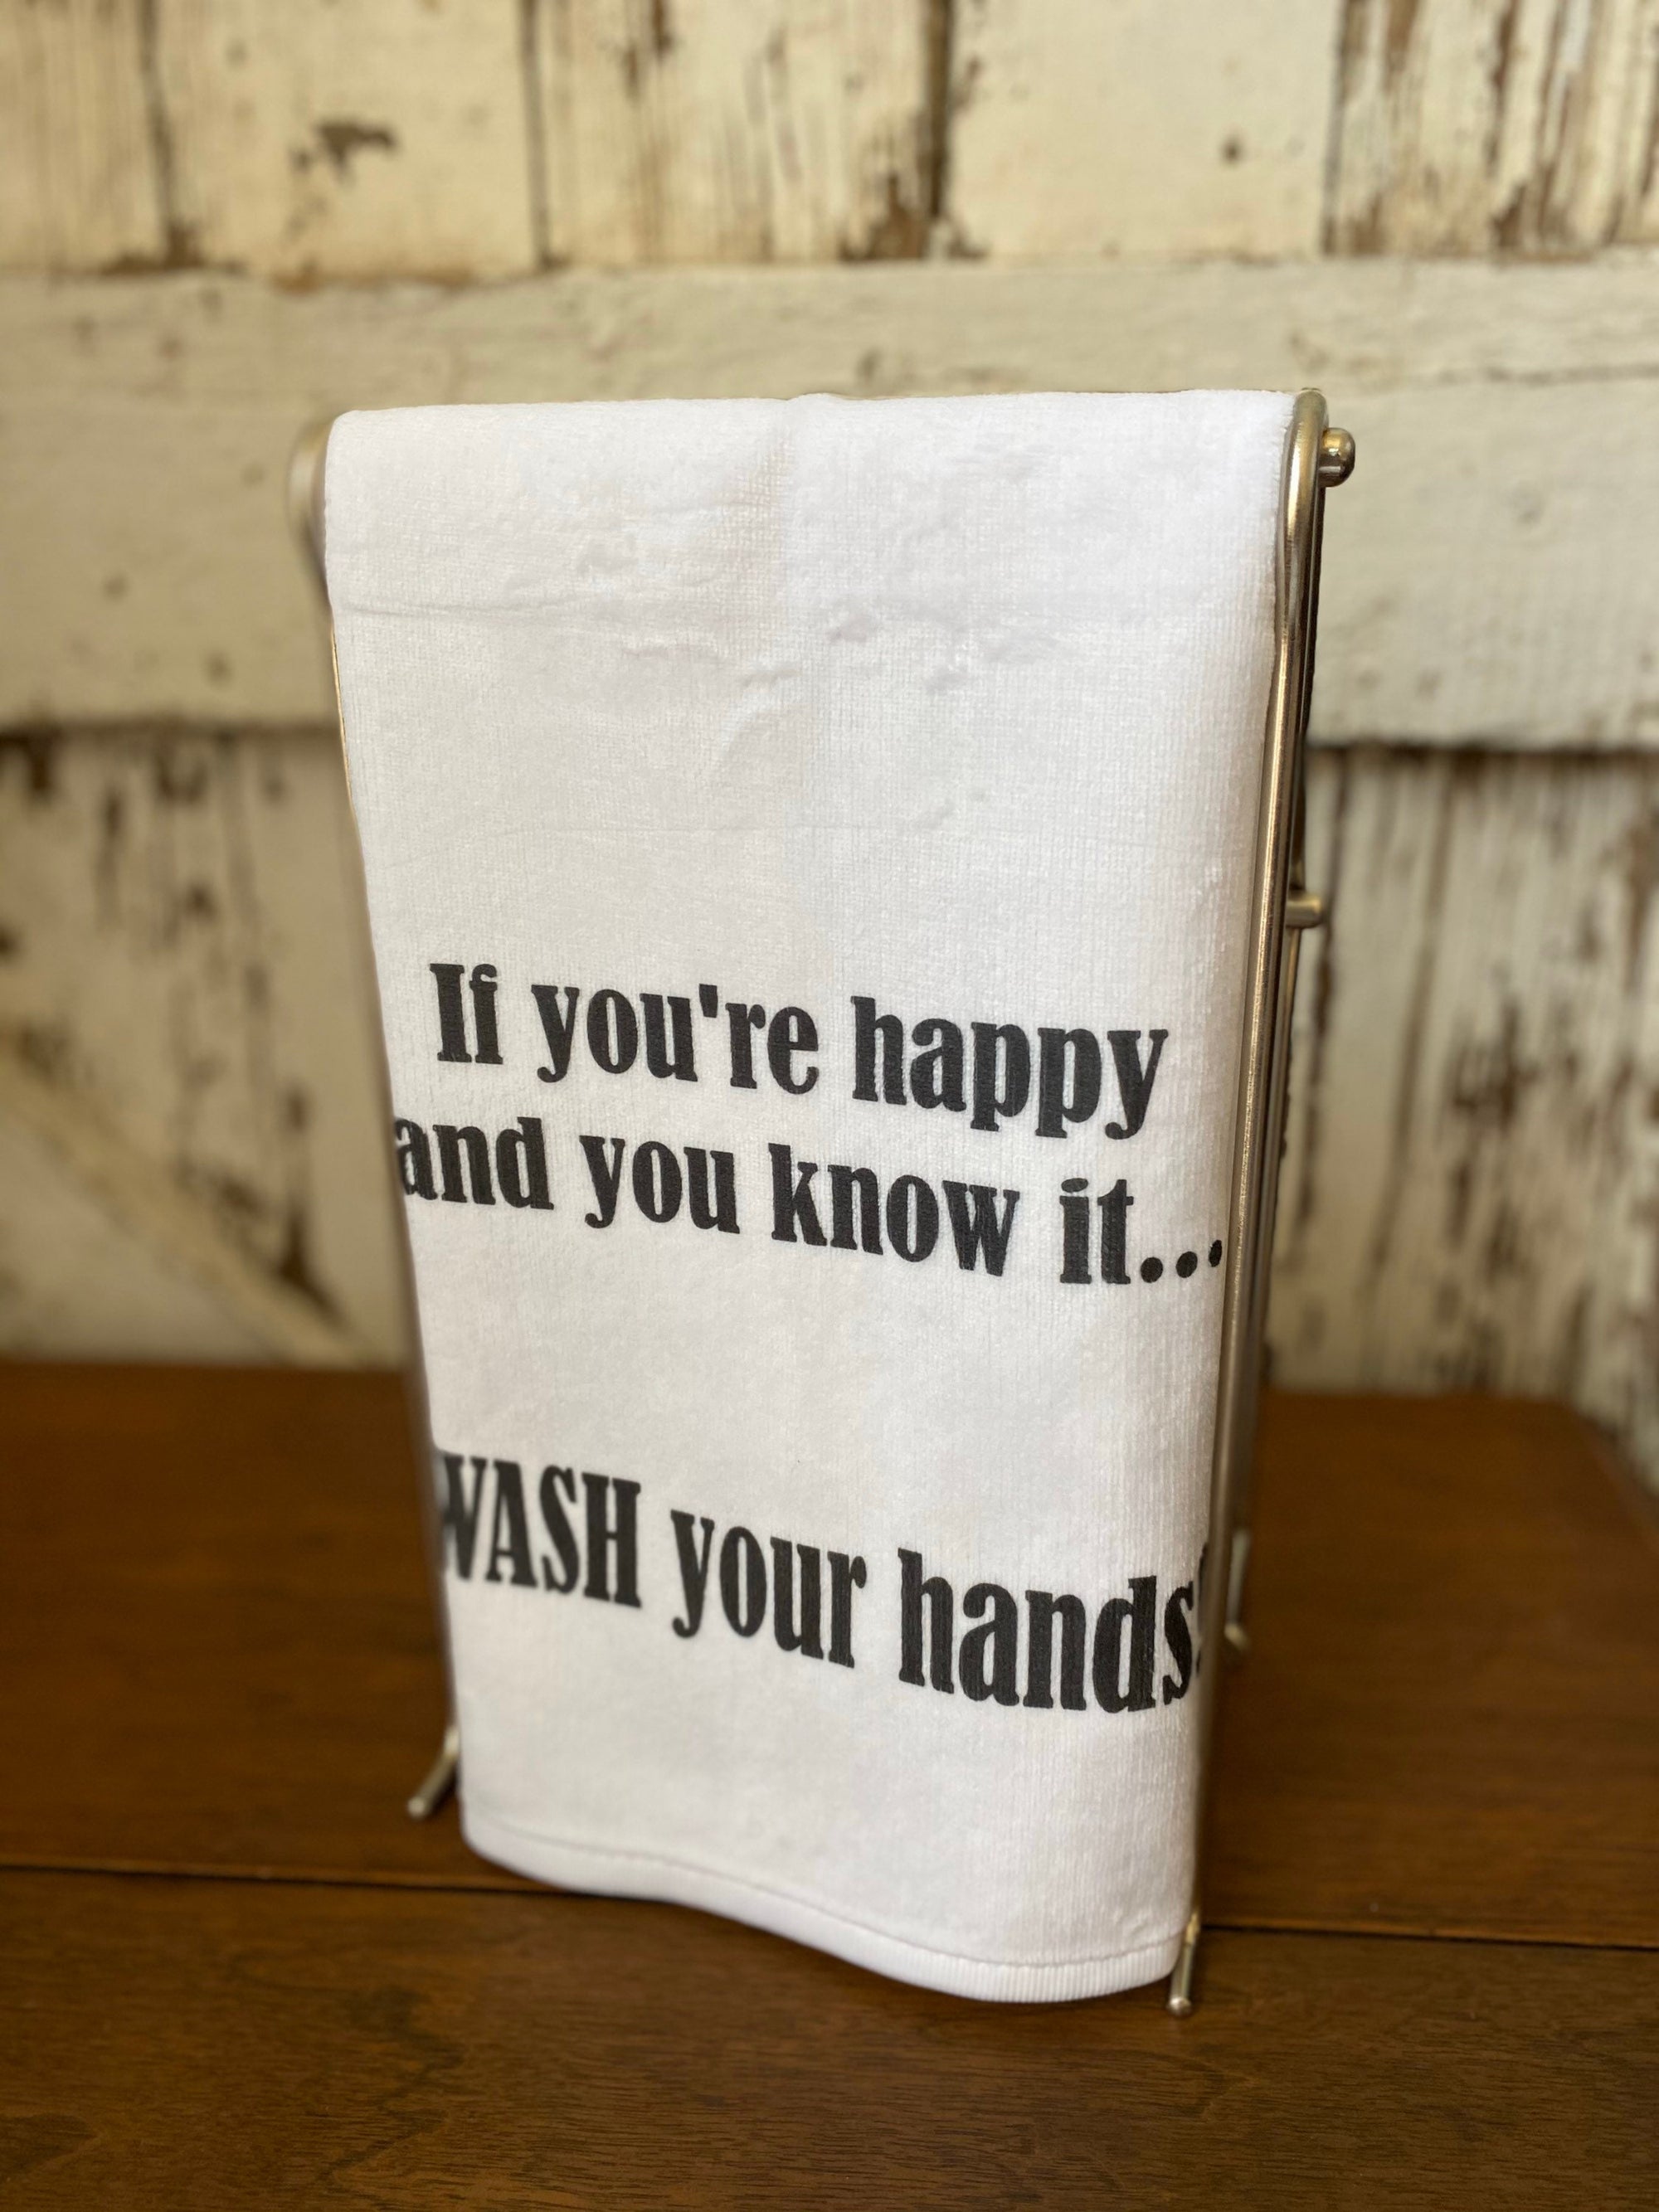 2 Pieces Funny Hand Towels with Sayings Hello Sweet Cheeks Wash Your Hands